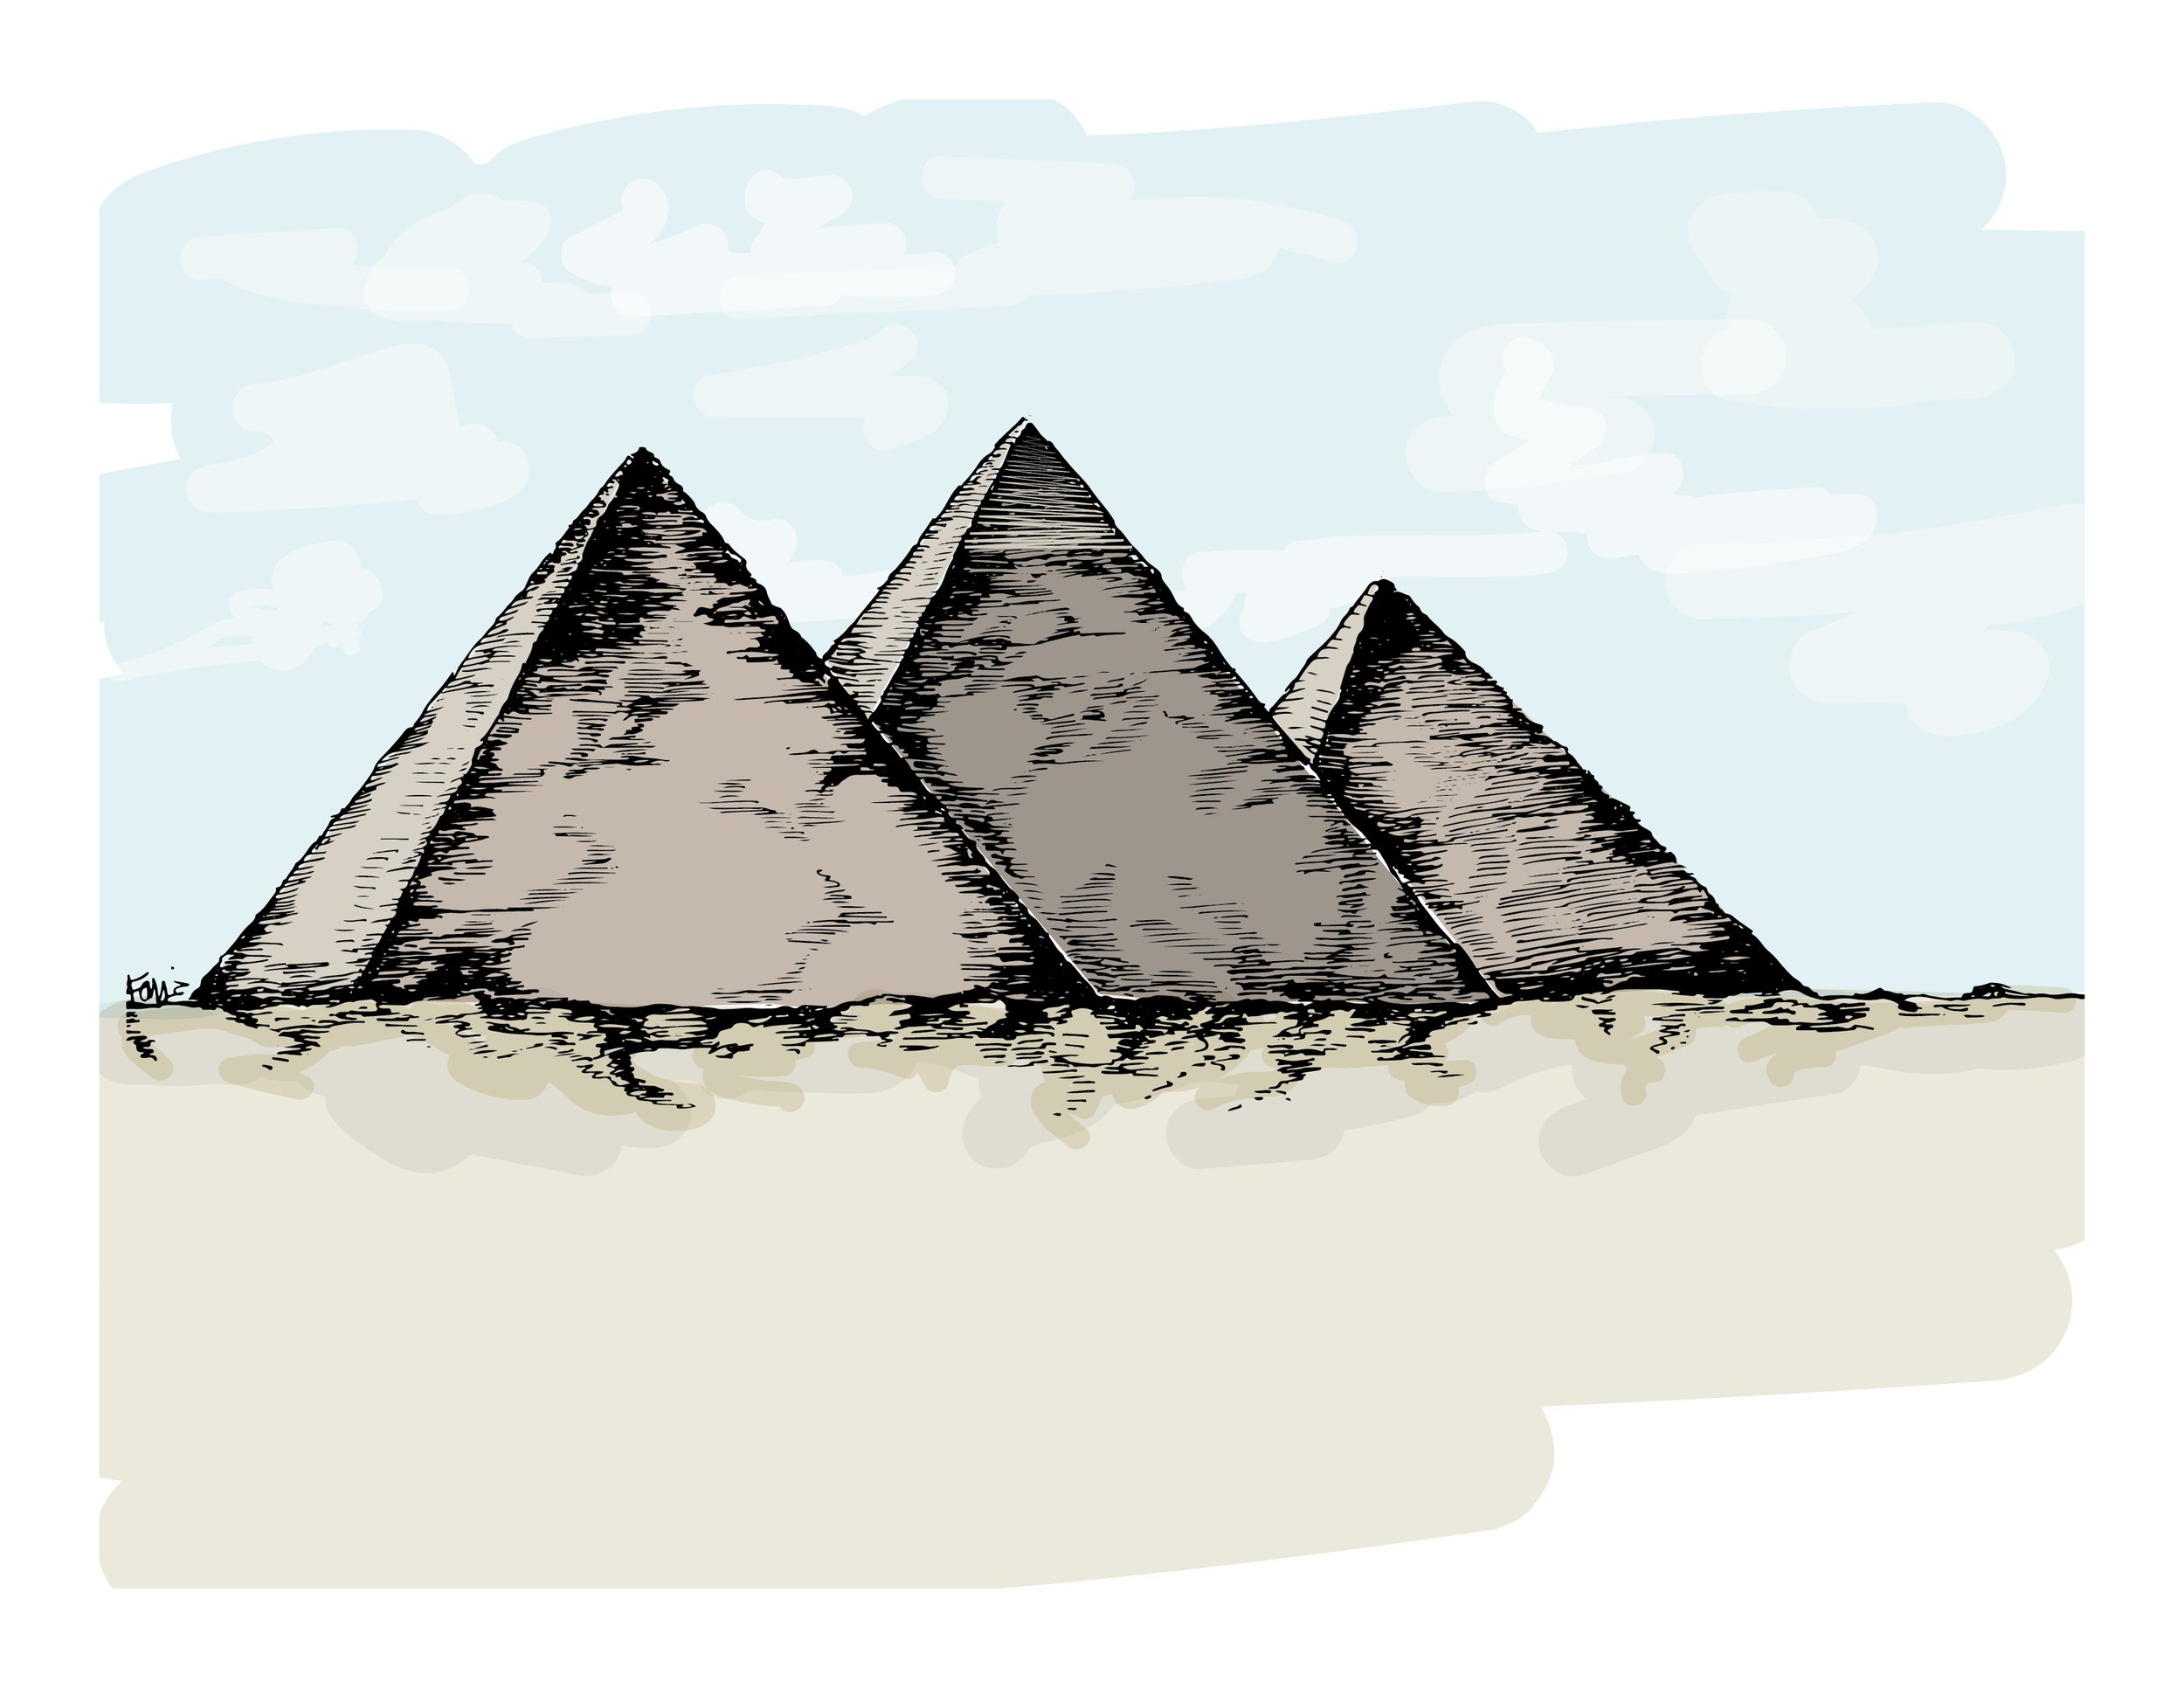 The Pyramid of Menkaure and Its Lost Treasures